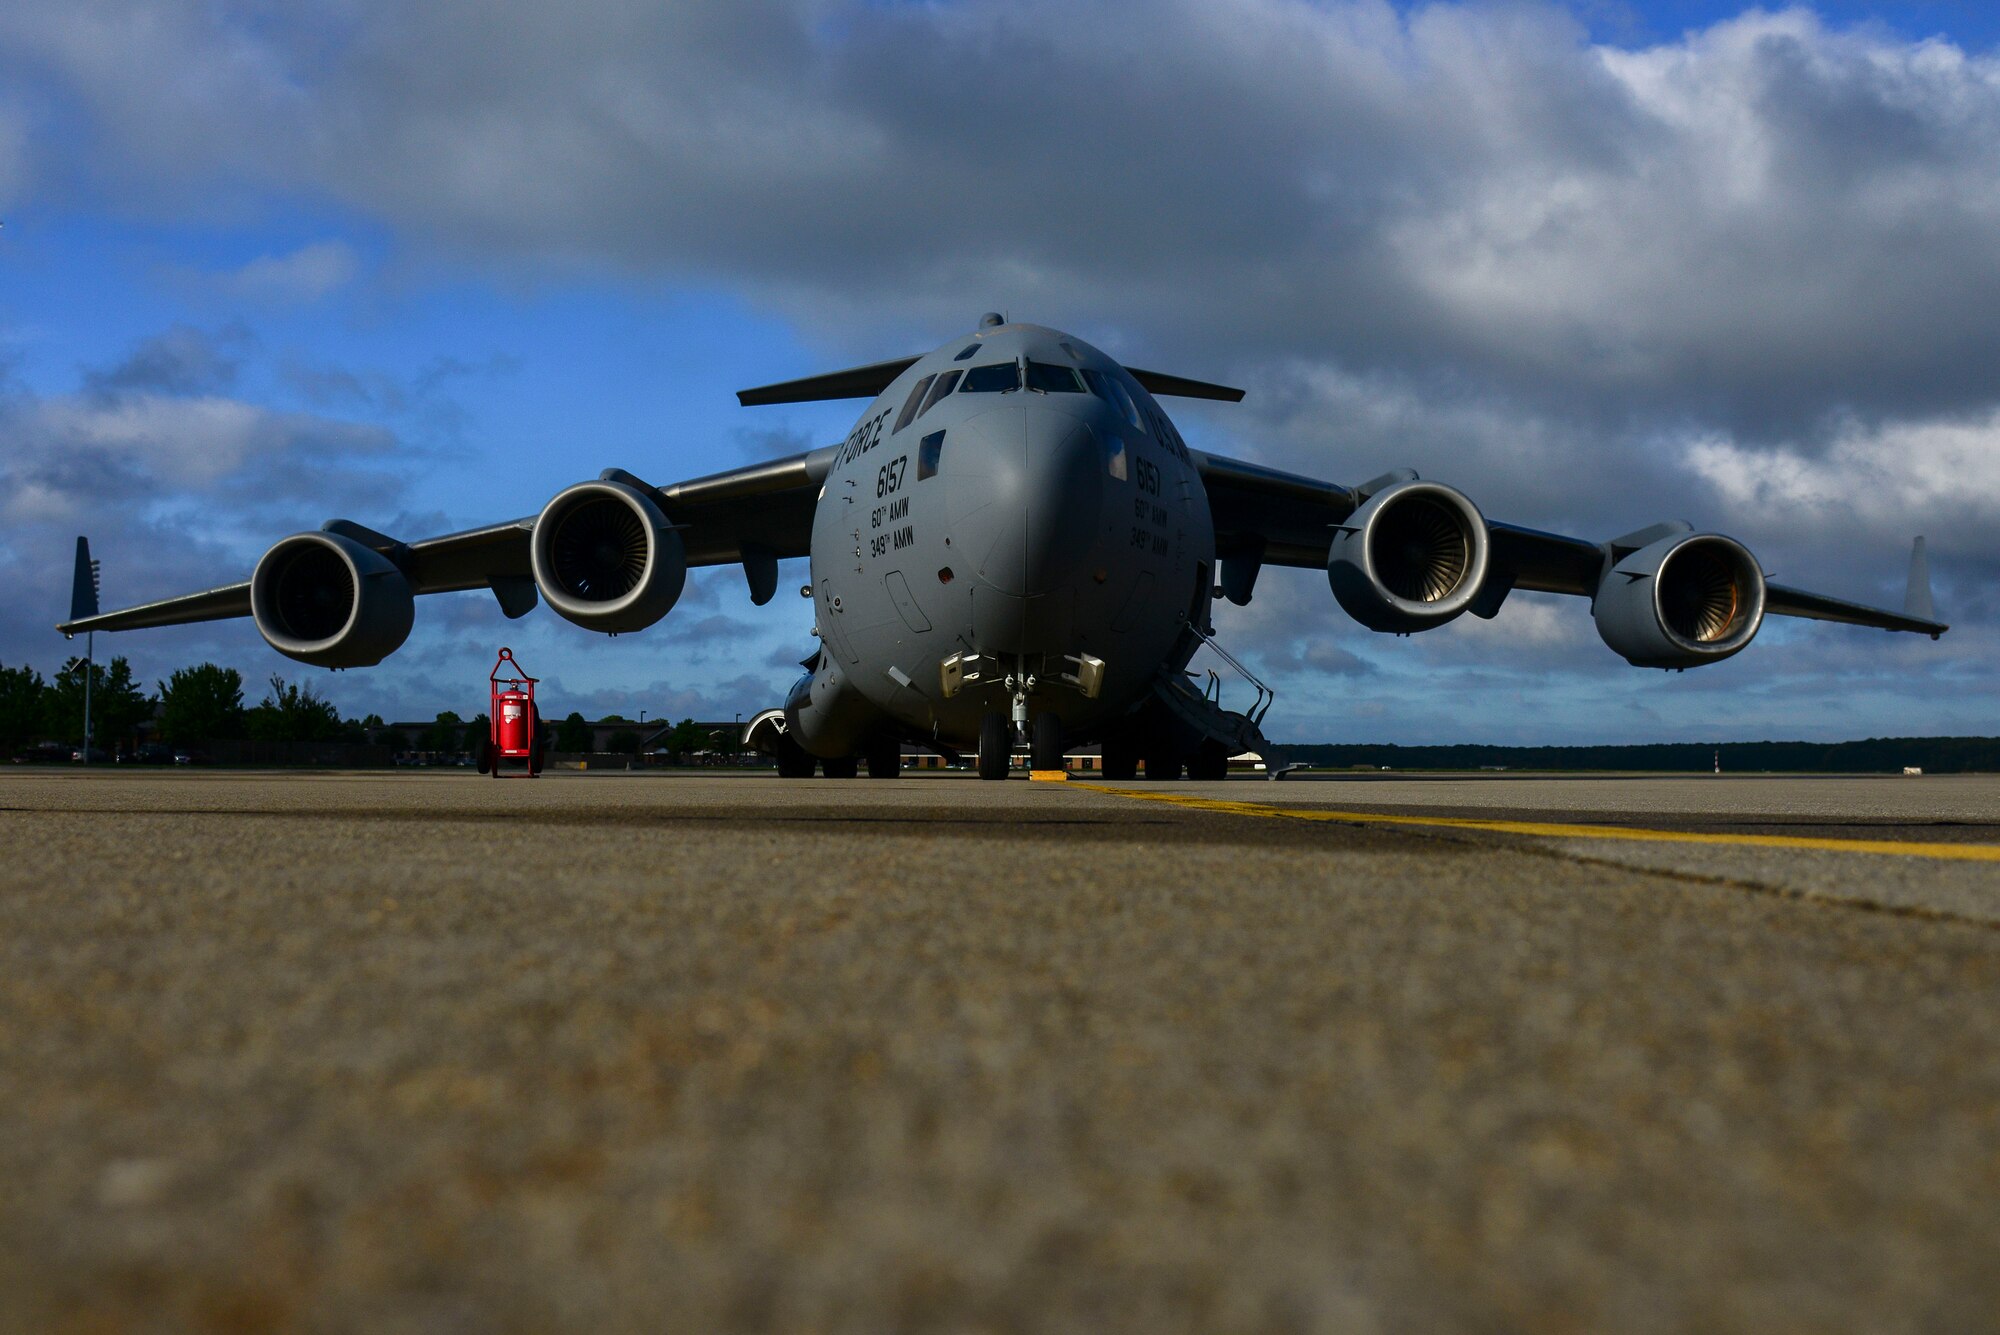 A C-17 Globemaster carrying personnel from the 633rd Medical Group prepares for departure at Langley Air Force Base, Va., Sept. 26. The 633rd MDG mission during their deployment to West Africa is to deliver and build the Air Force’s Expeditionary Medical Support System, a modular medical treatment platform and train healthcare workers in its operation. Langley Airmen will not be involved in treatment of patients exposed to the virus. (U.S. Air Force photo by Senior Airman Kayla Newman/Released)